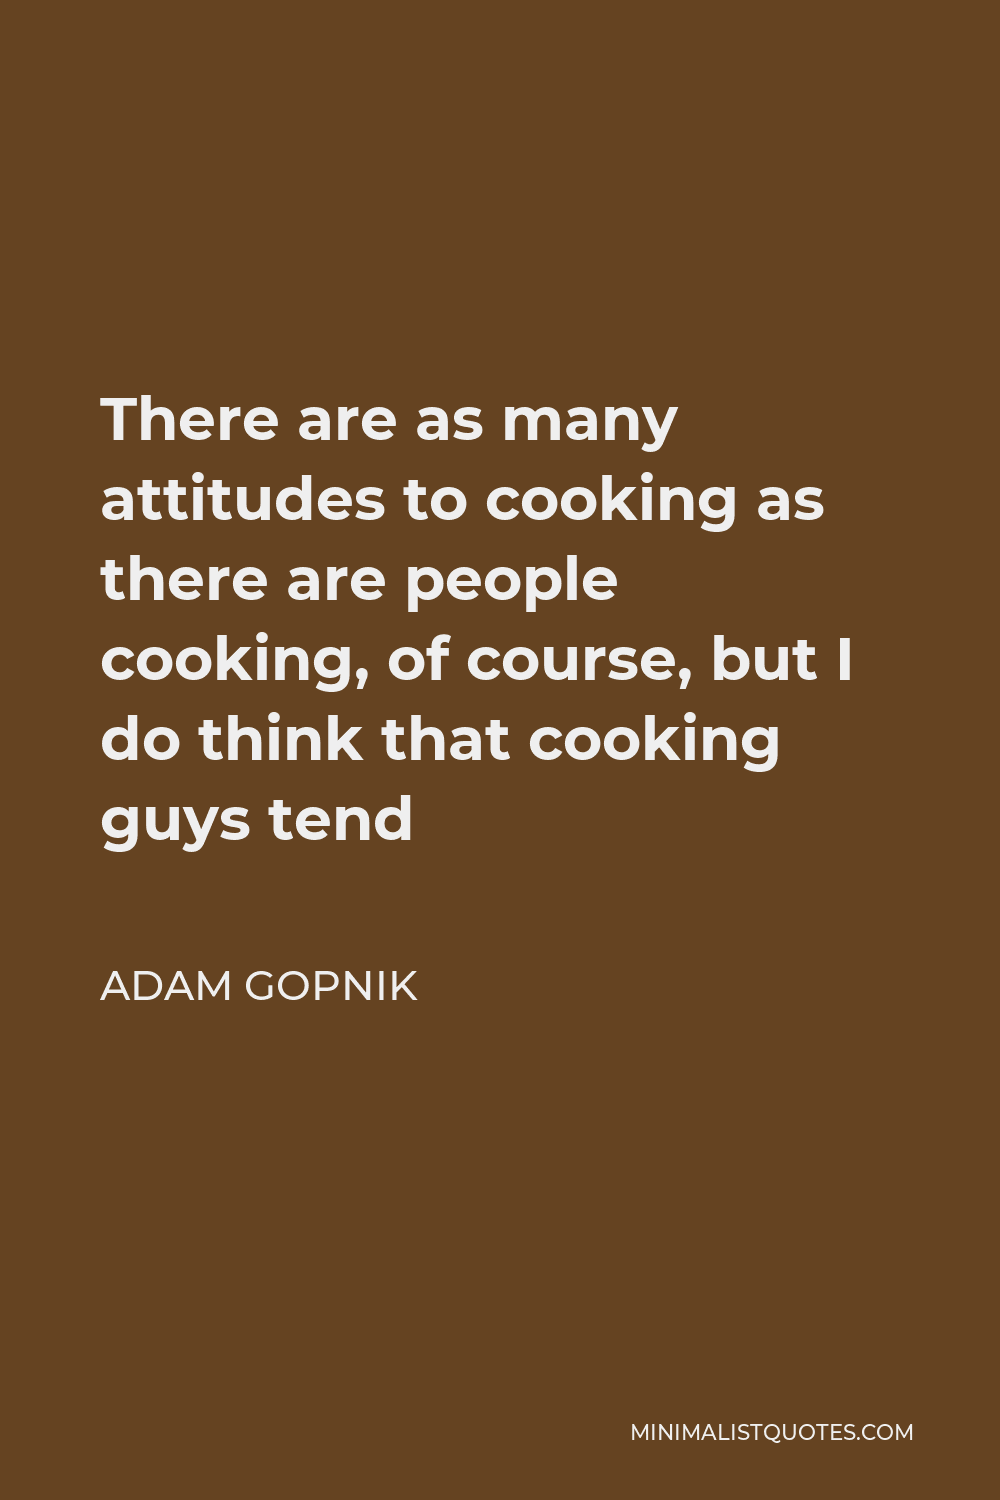 Adam Gopnik Quote - There are as many attitudes to cooking as there are people cooking, of course, but I do think that cooking guys tend